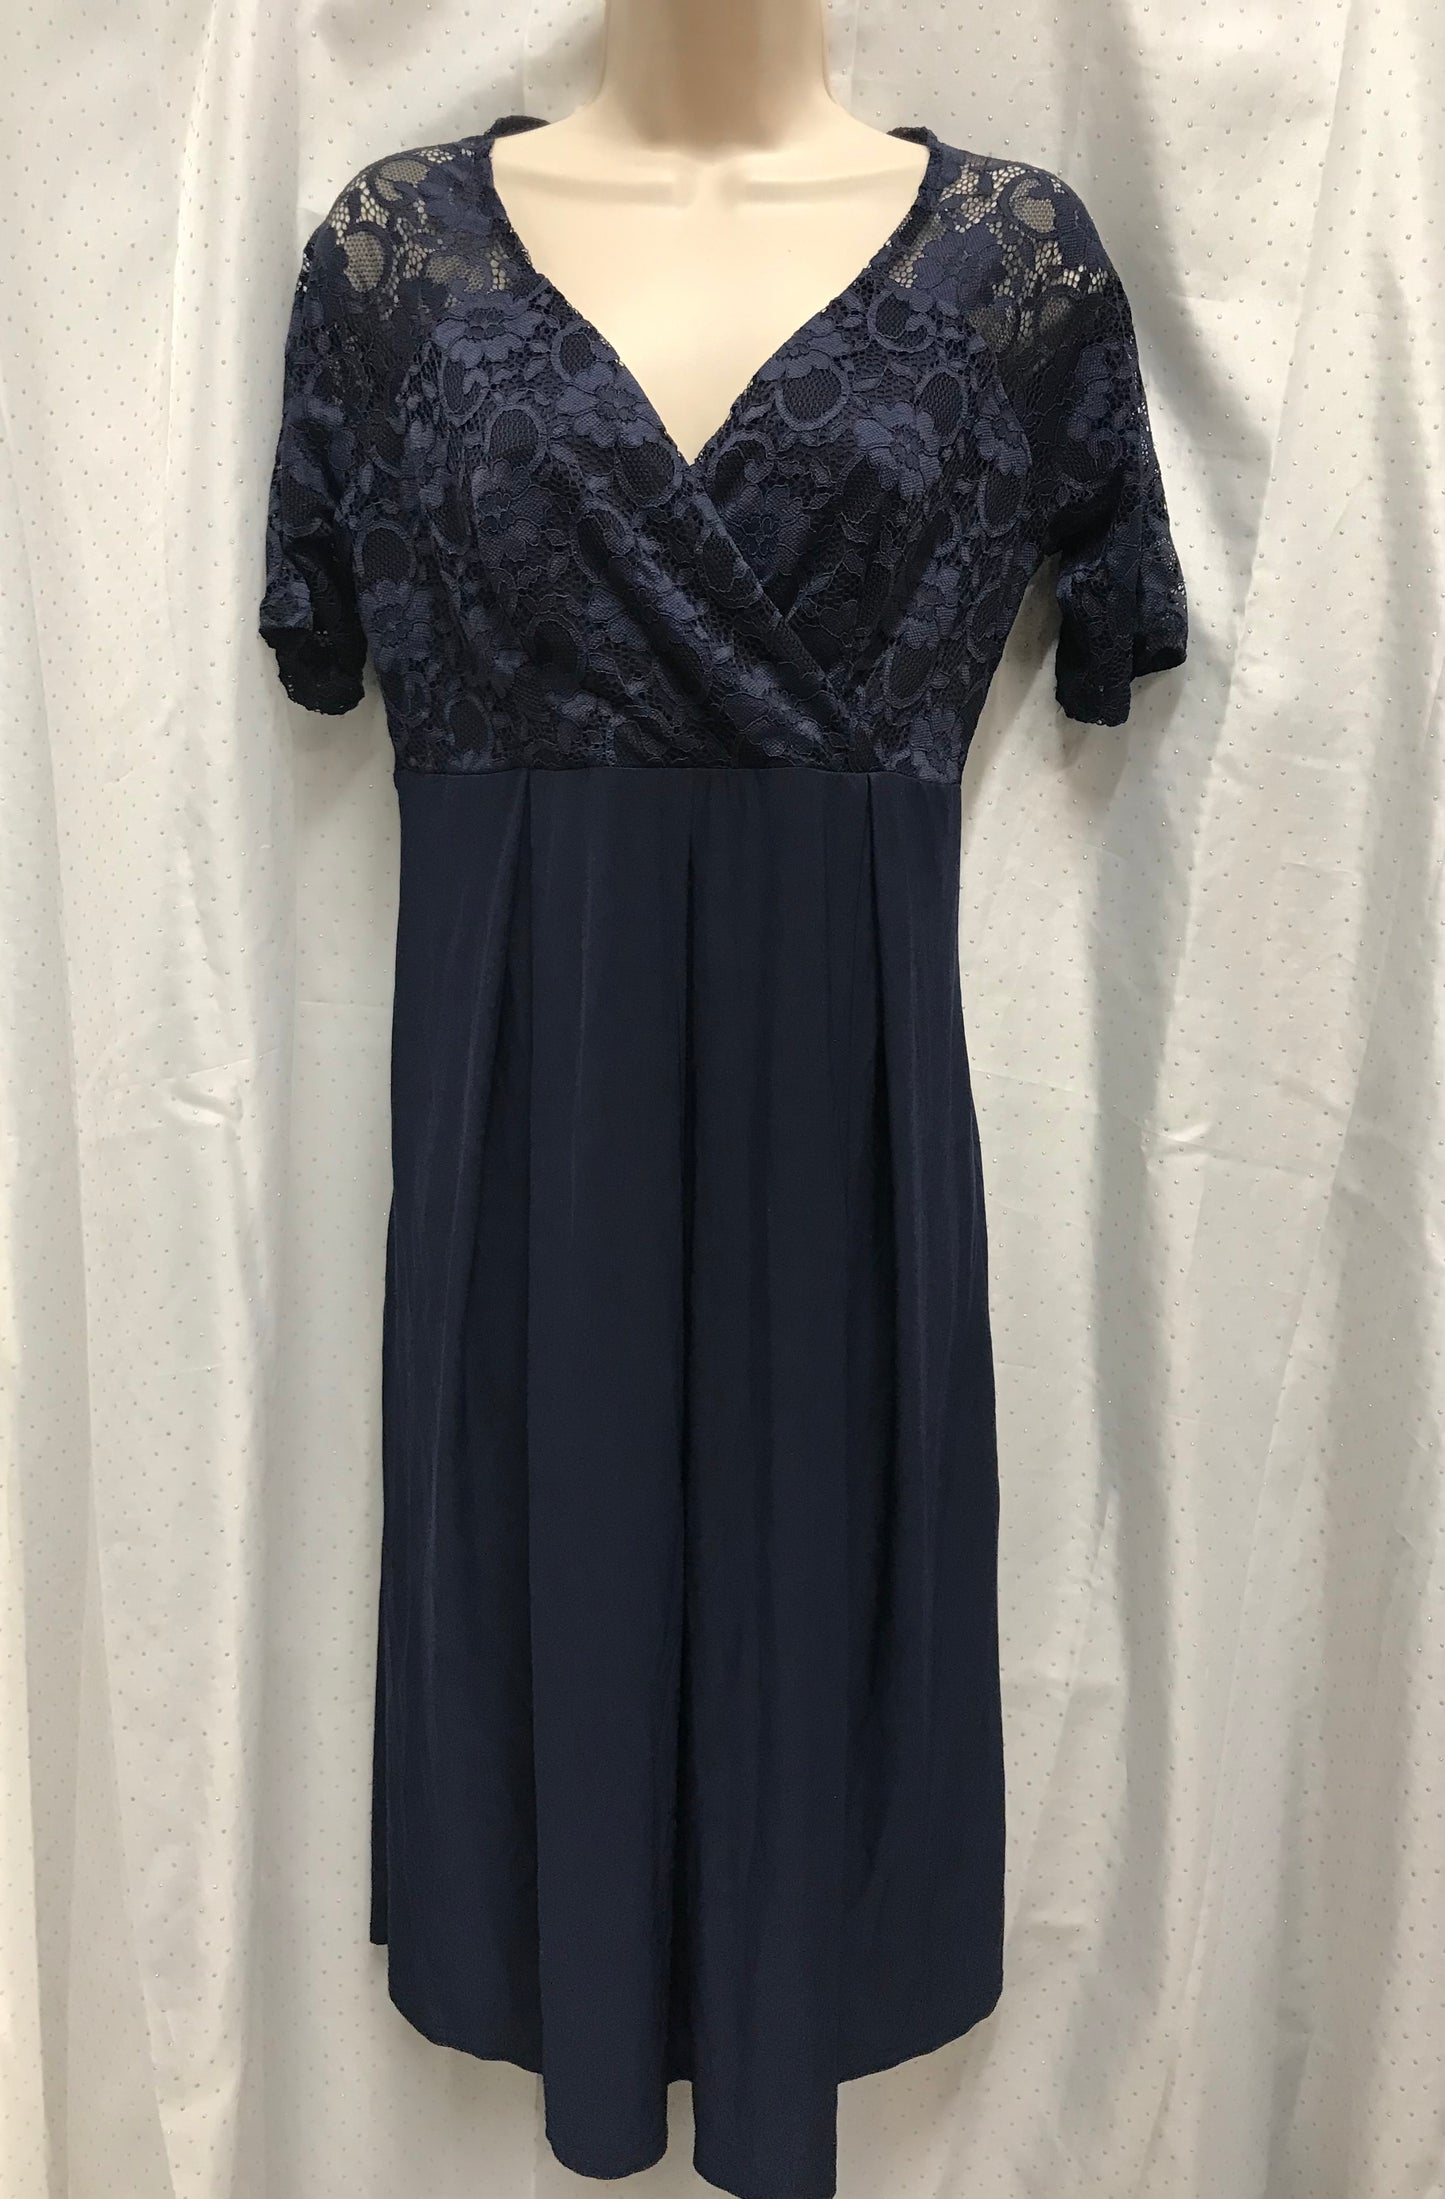 ASOS Maternity BNWT Size 10 Navy Laced Style Top MIDI Dress